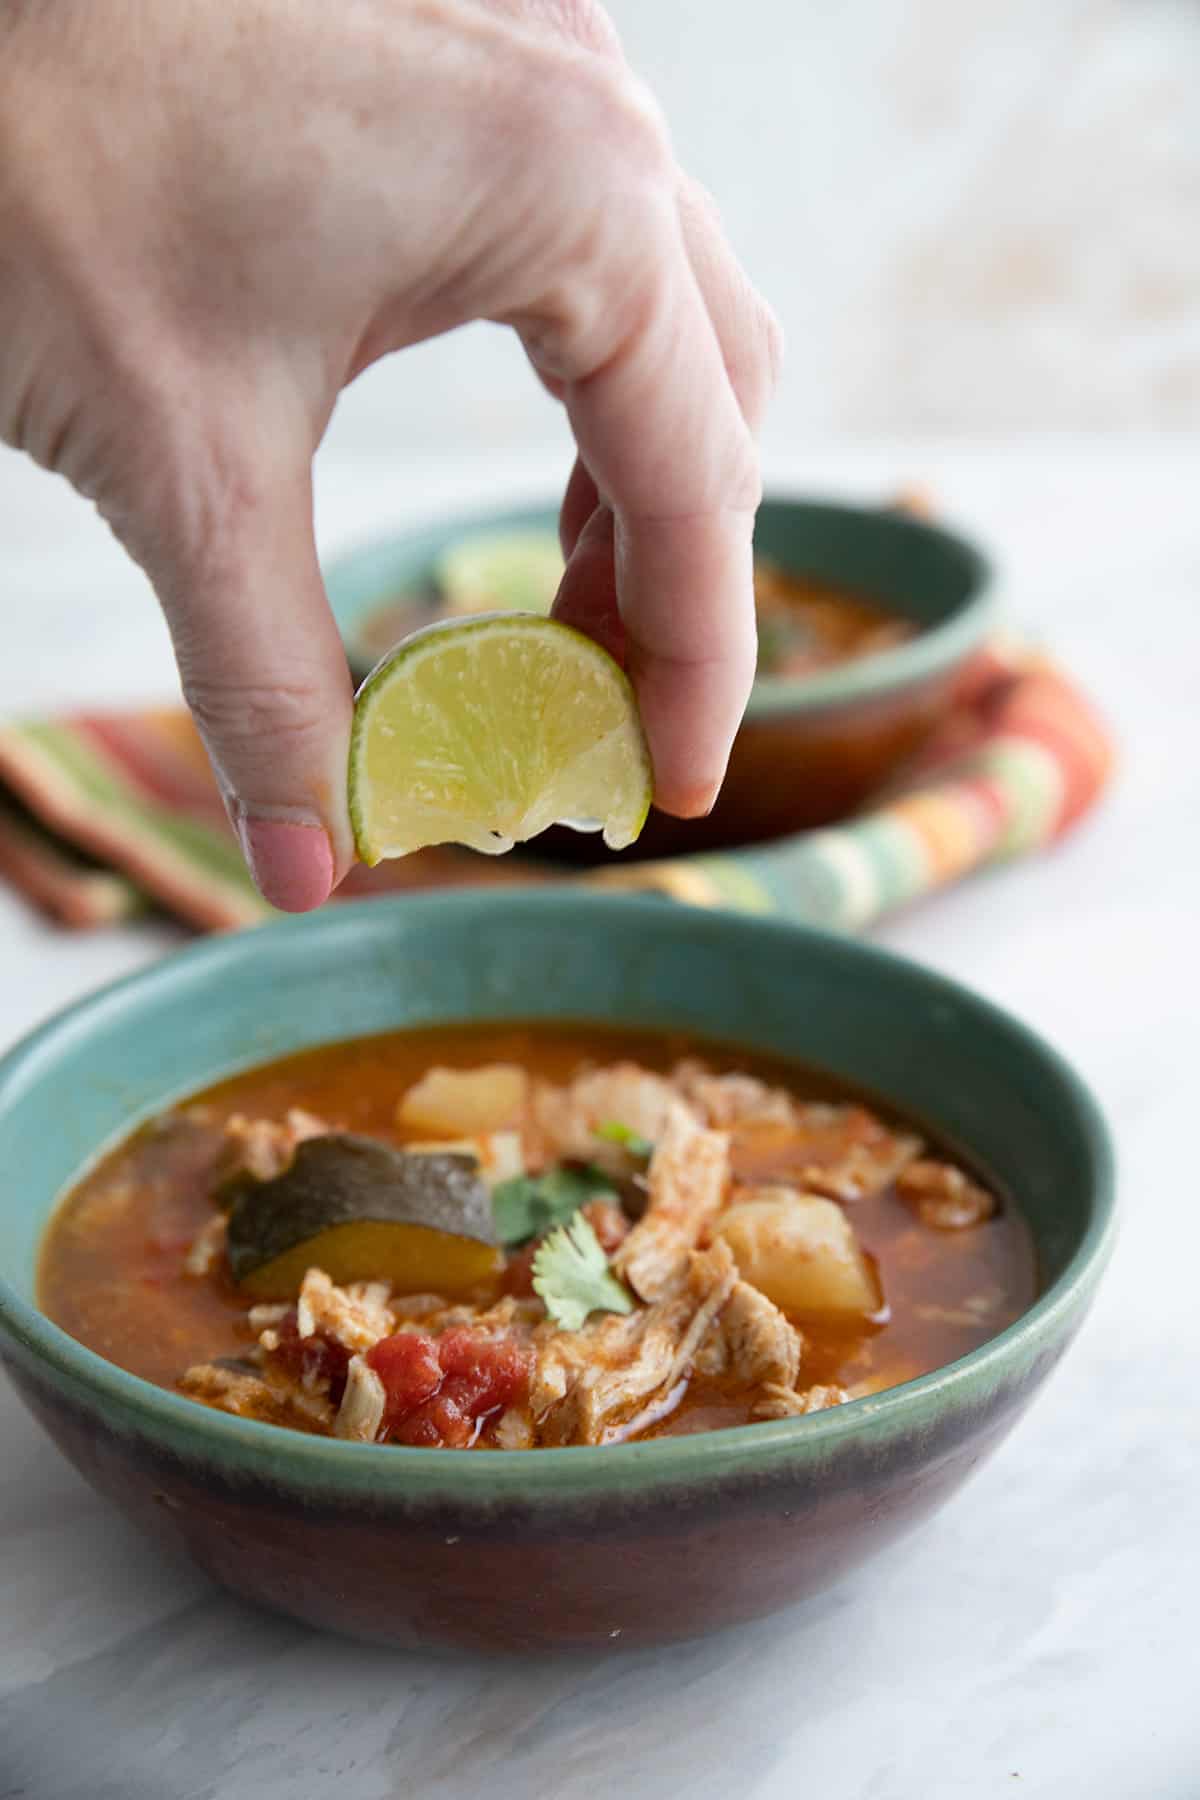 A hand squeezing lime into a bowl of southwestern Pork Stew.